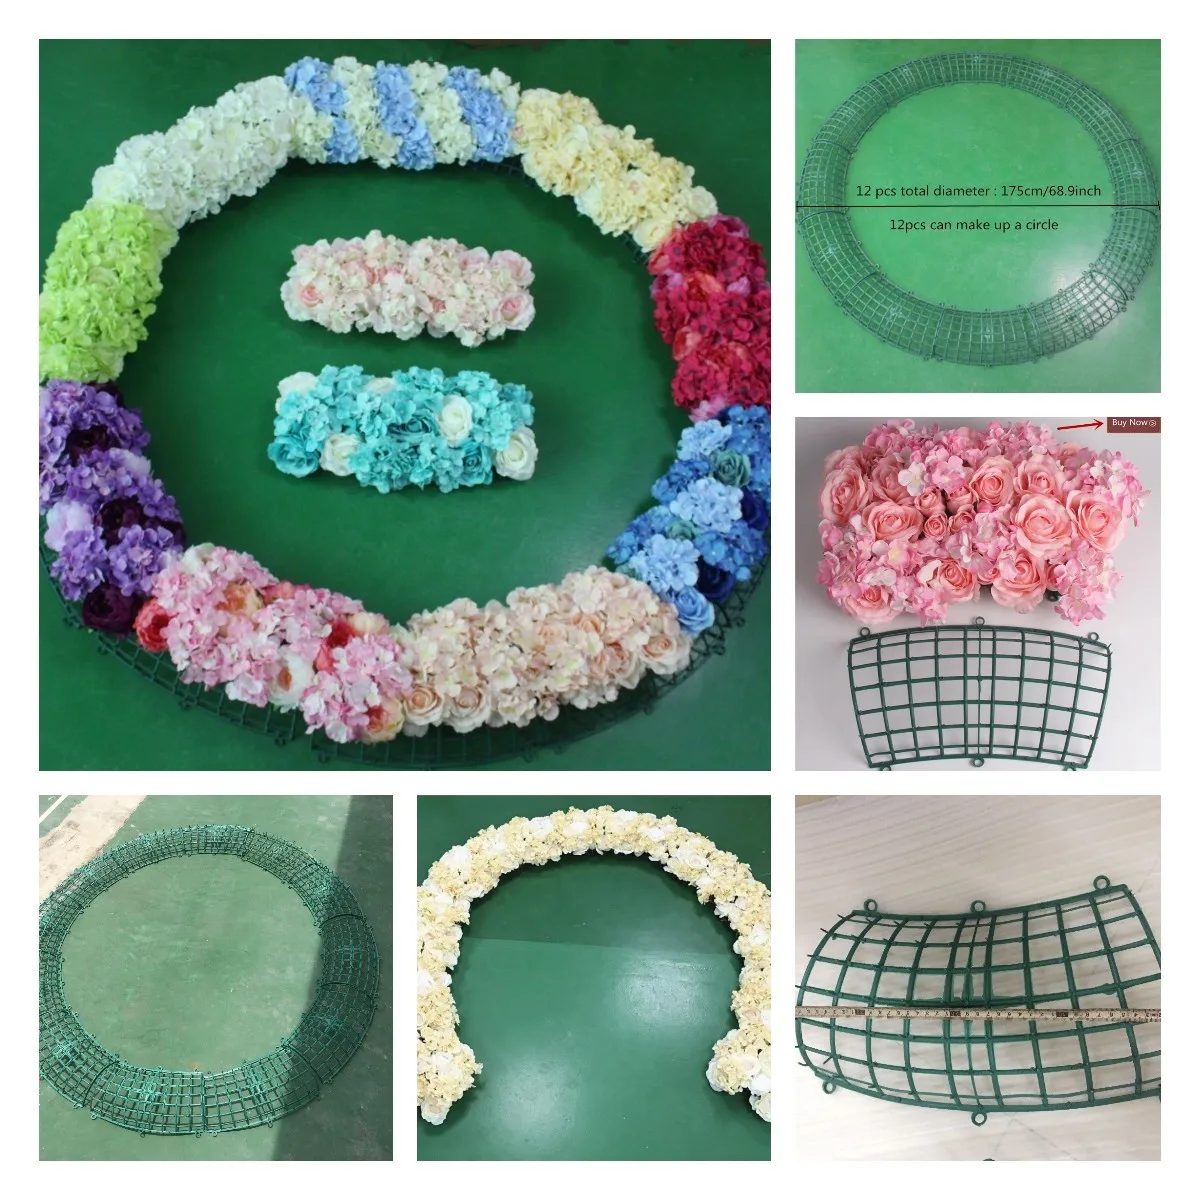 12 pcs Flower Garland Plastic Bent Sub-Rack Arches Floral Bouquet Circle Holder Frame For Wedding Birthday Party Backdrops Decor